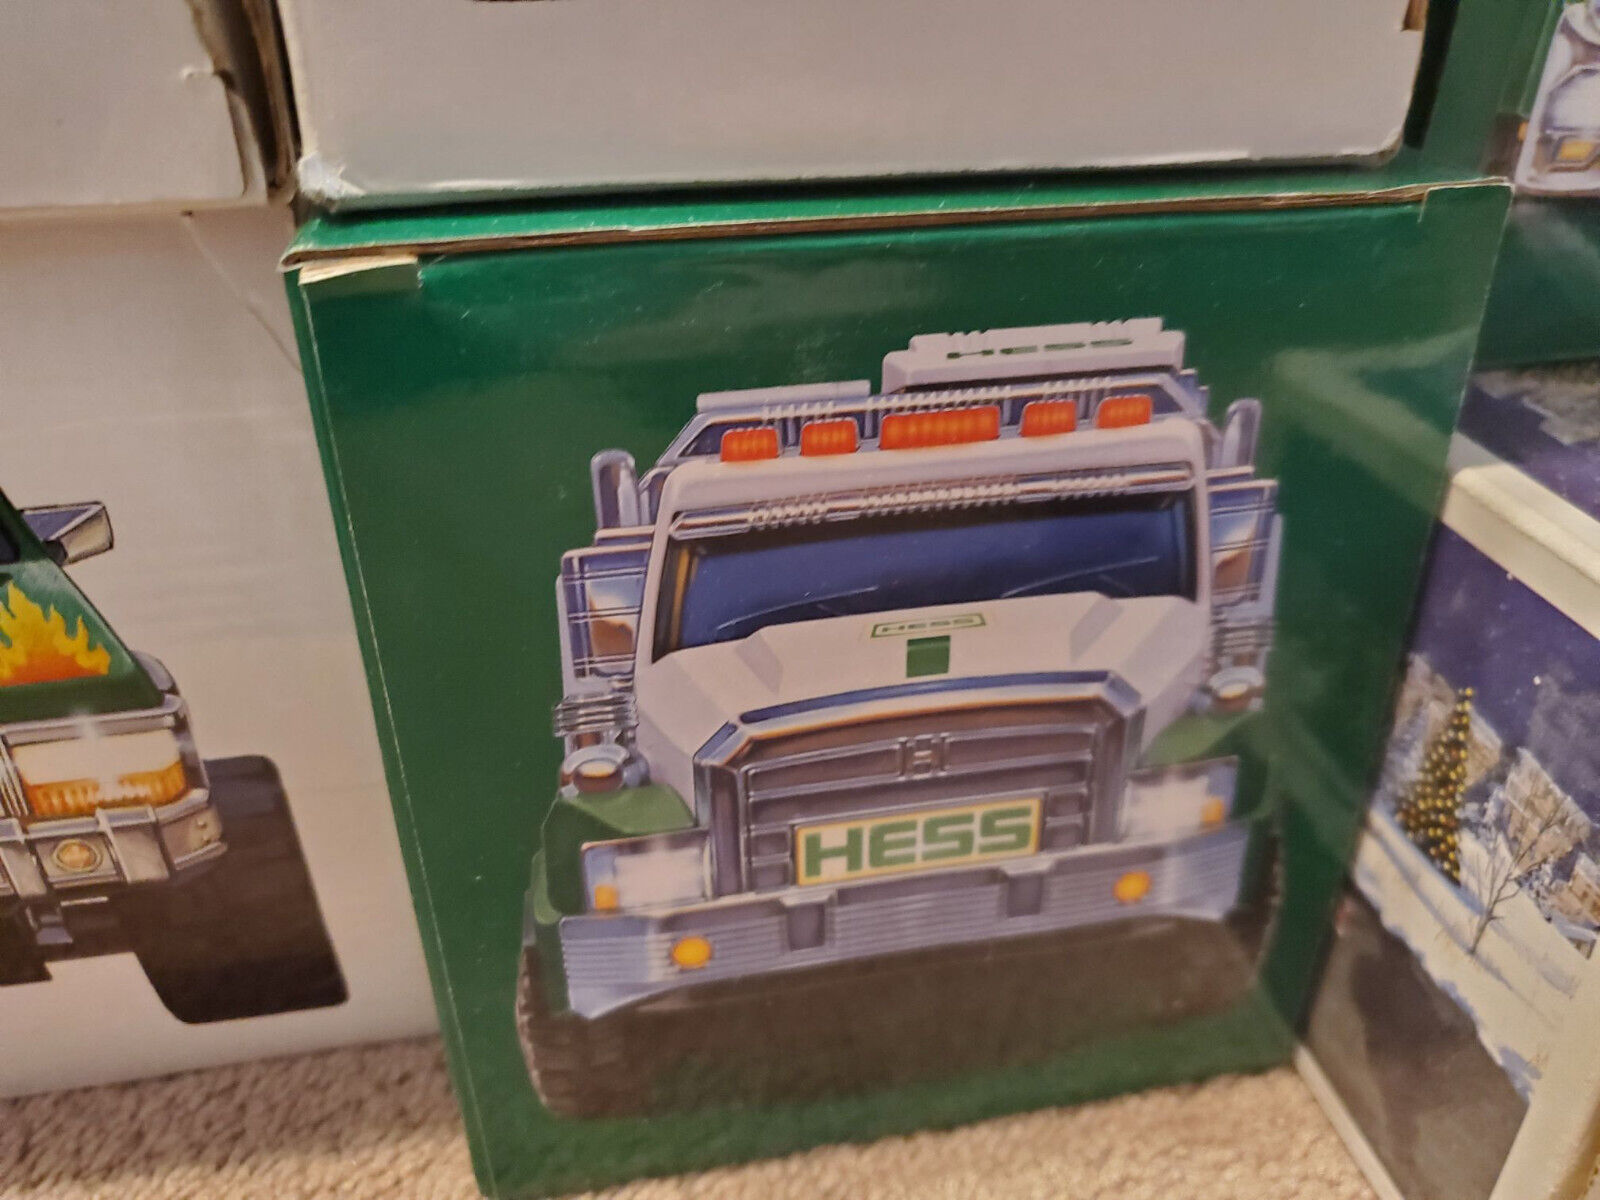 Hess Christmas Toy Truck 2017, Dumptruck with Loader, Boxed, See Description